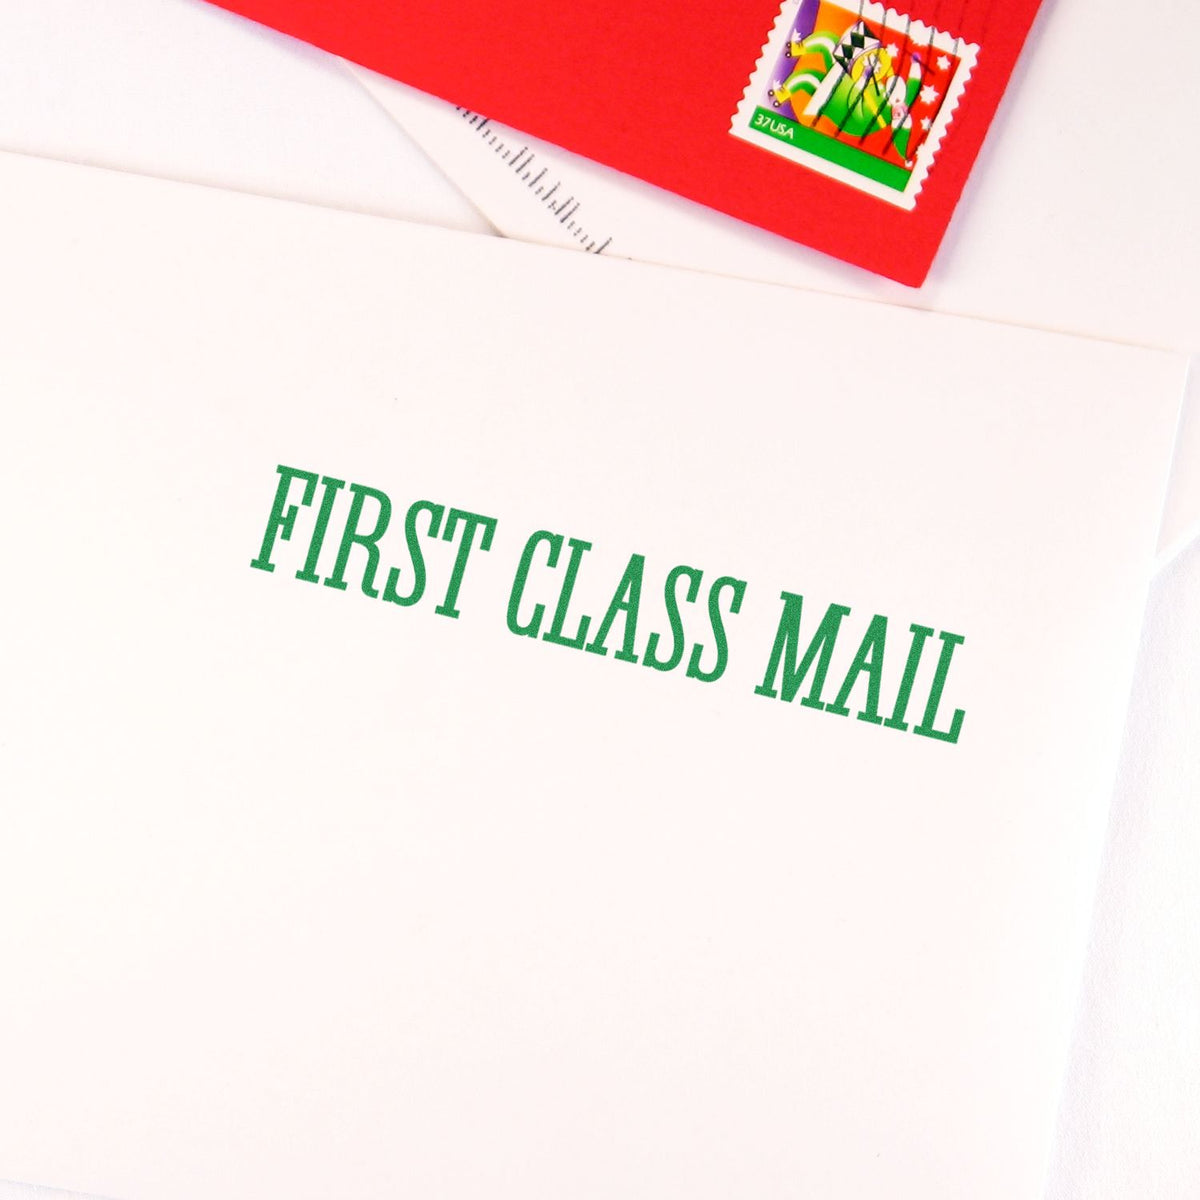 Slim Pre-Inked Times First Class Mail Stamp In Use